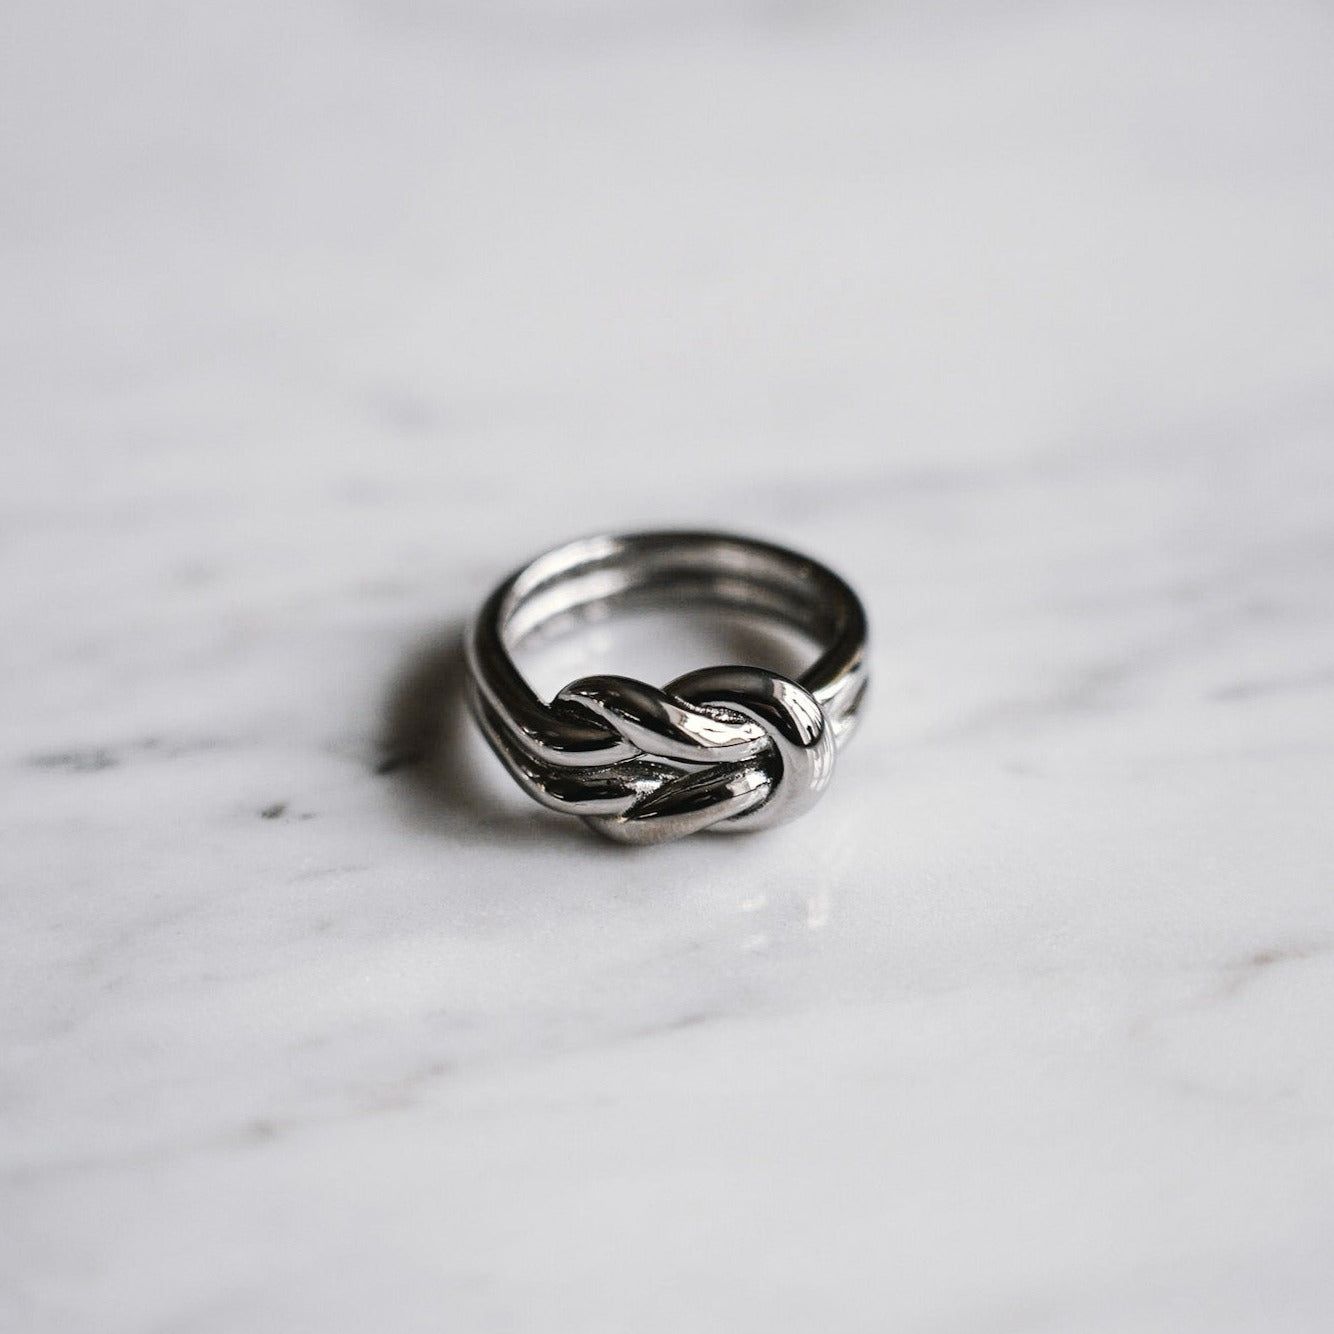 Perpetual band ring - Silver-toned